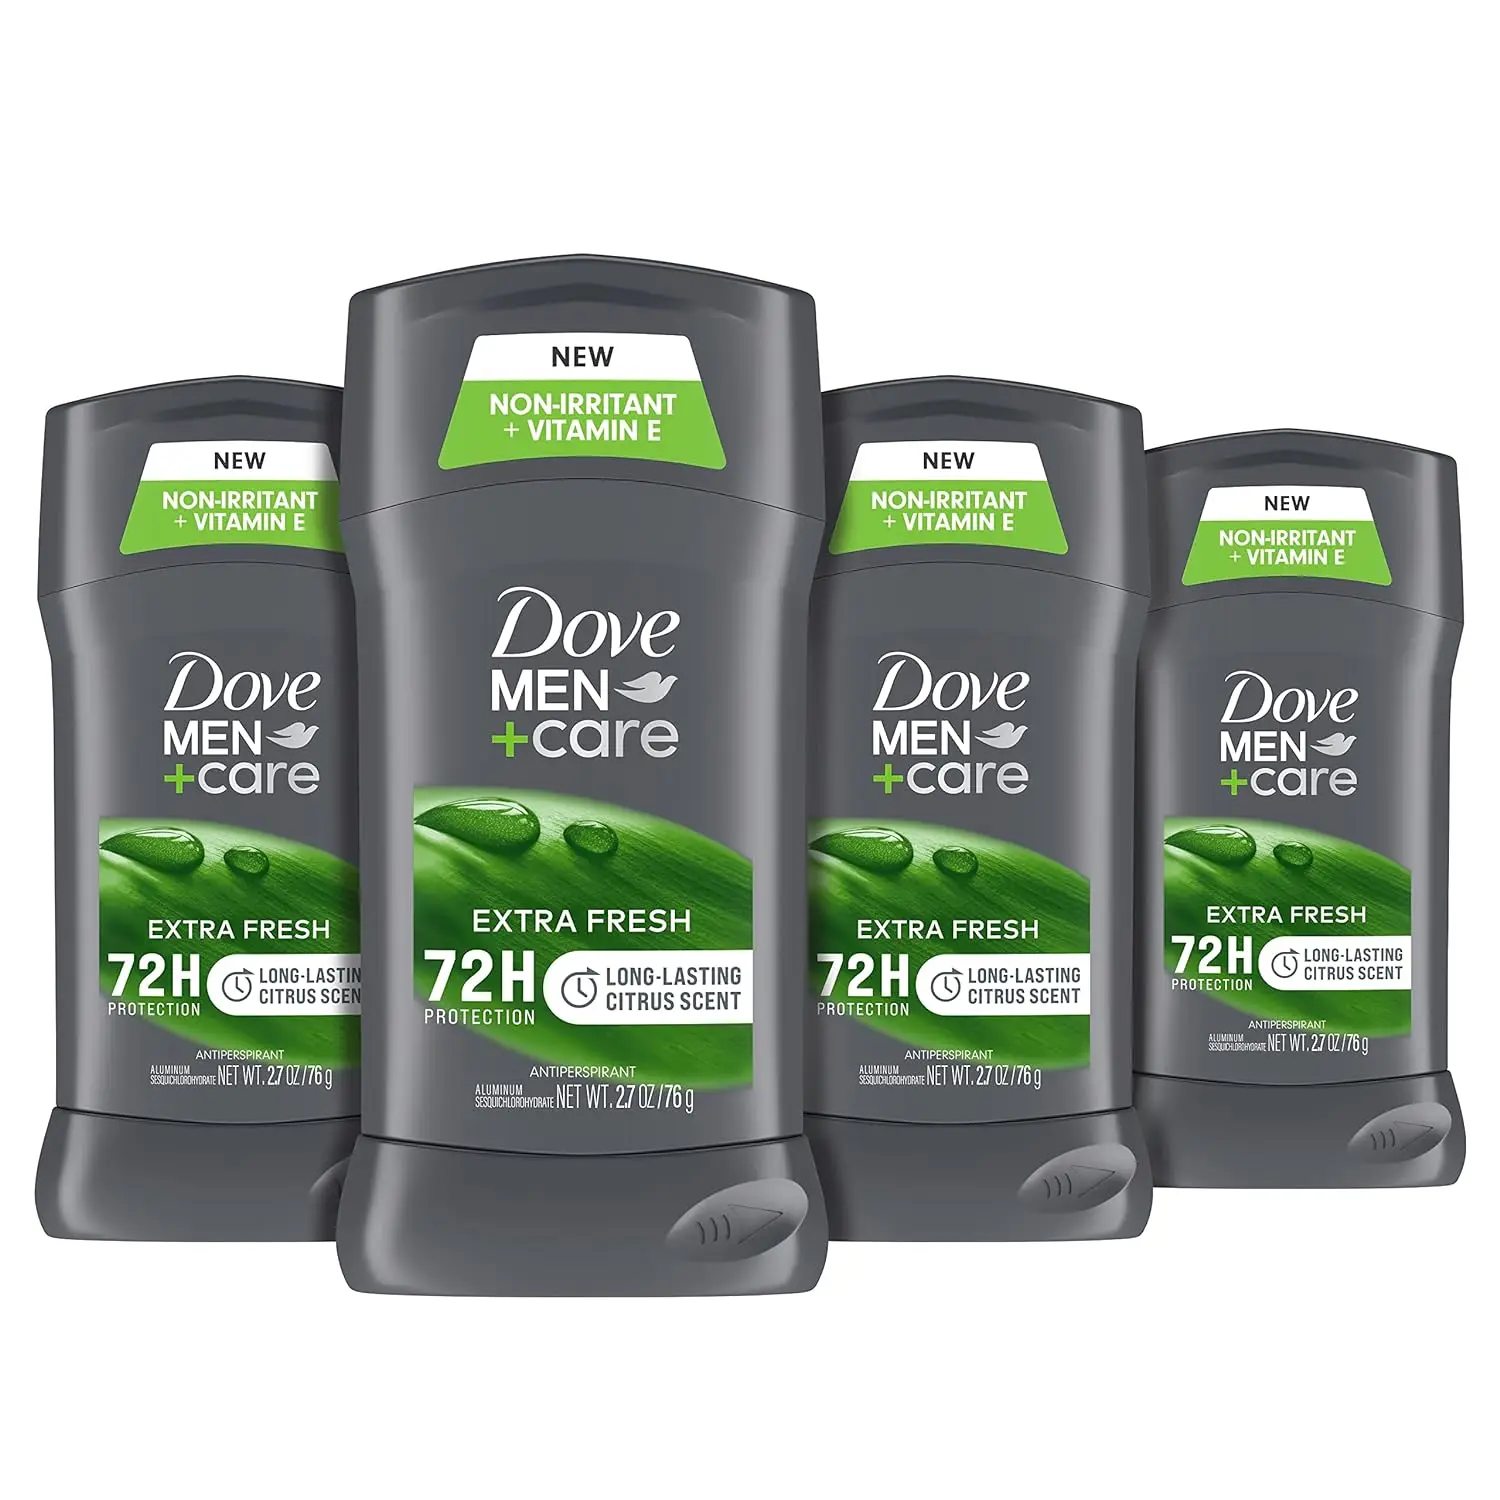 New Fresh-doves Men+care Deodorant For Men Extra 4 Counts With 72-hr ...